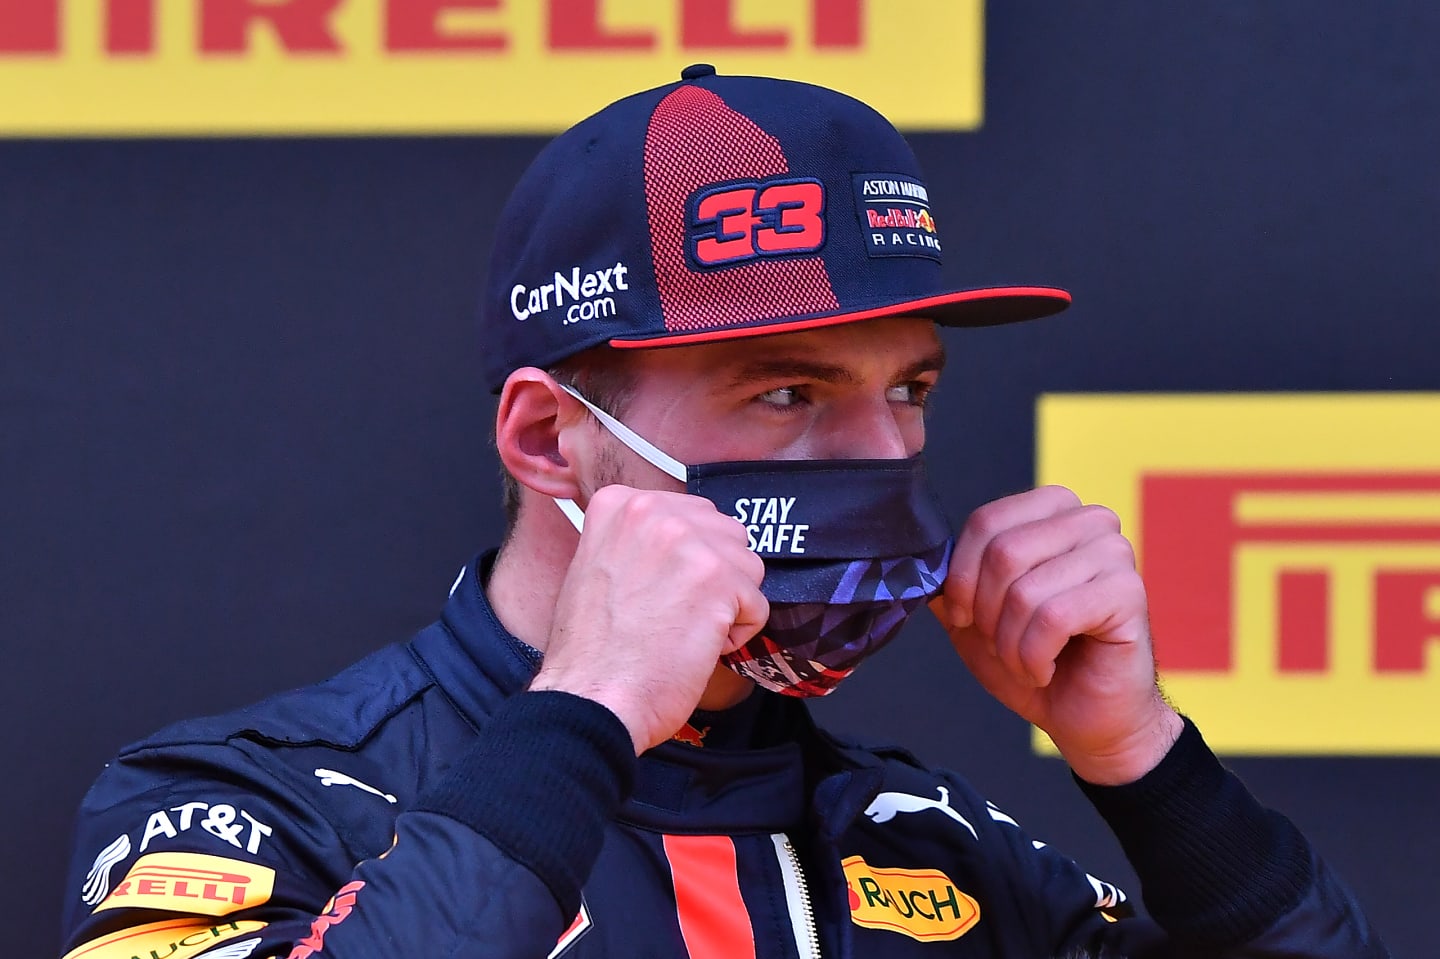 SPIELBERG, AUSTRIA - JULY 11: Second placed qualifier Max Verstappen of Netherlands and Red Bull Racing puts on his mask in parc ferme during qualifying for the Formula One Grand Prix of Styria at Red Bull Ring on July 11, 2020 in Spielberg, Austria. (Photo by Joe Klamar/Pool via Getty Images)